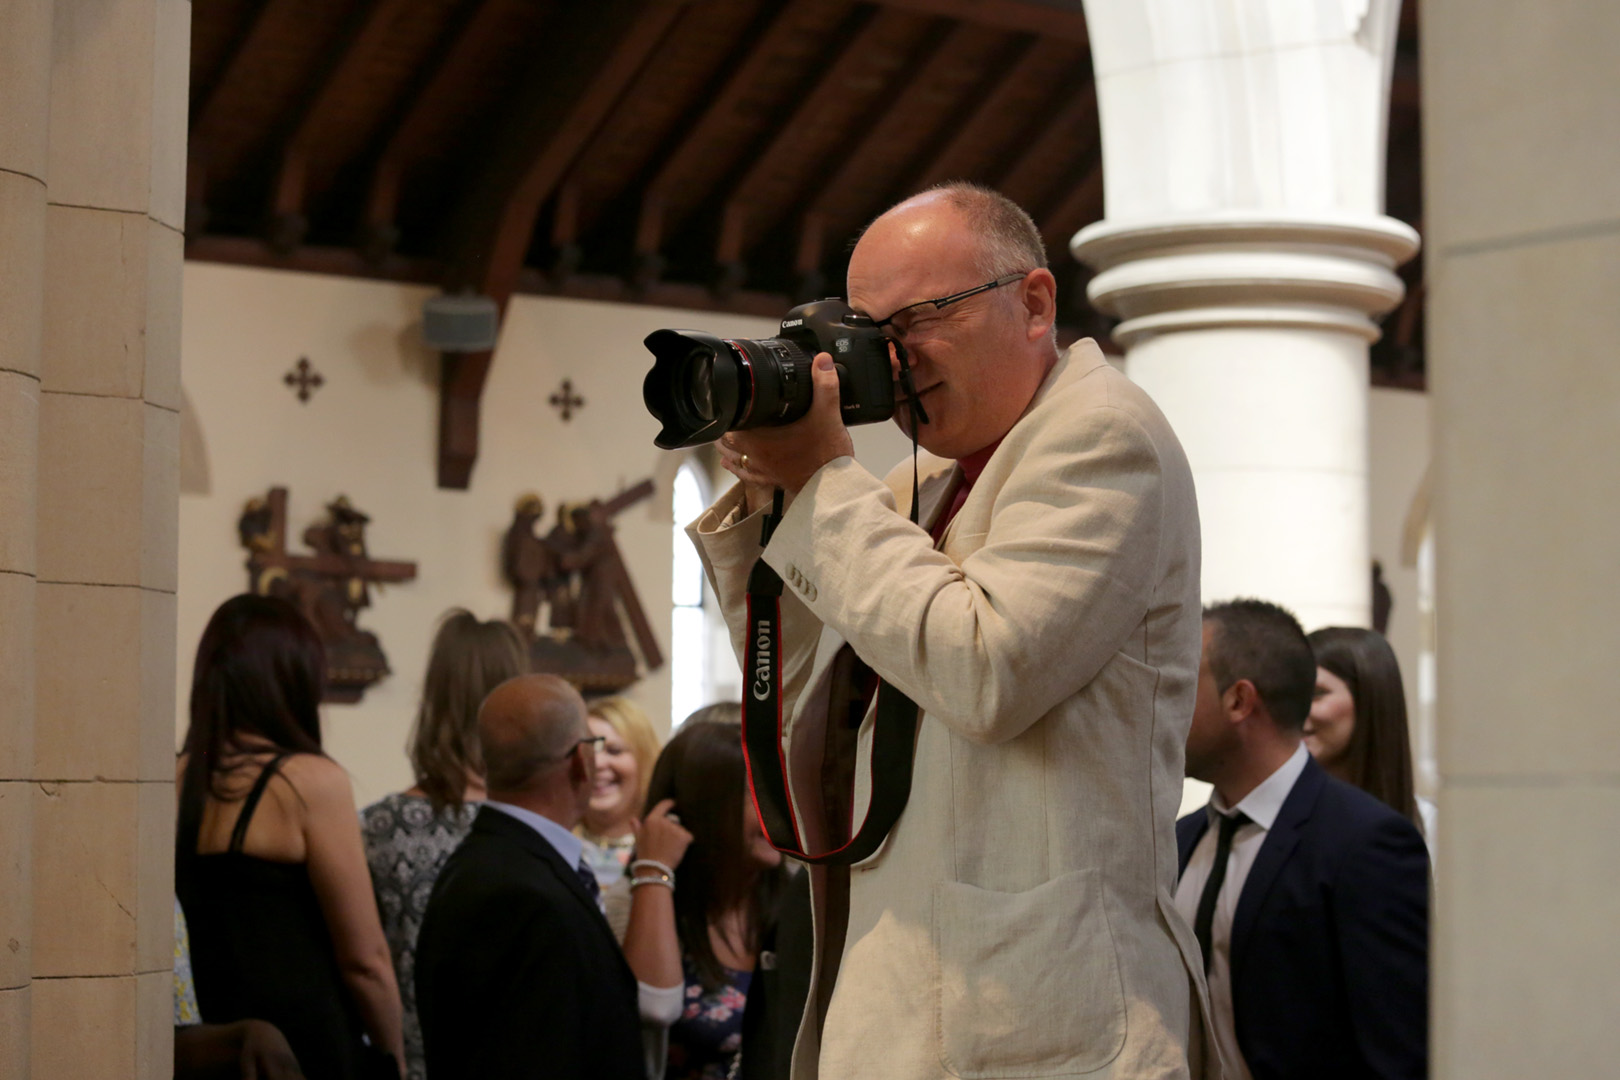 Tim Durham photographing a wedding at Saint Lawrence's Church Eastcote. Tim works at Pinner Wedding Photography and is a photographer in Harrow and a photographer in Ruislip